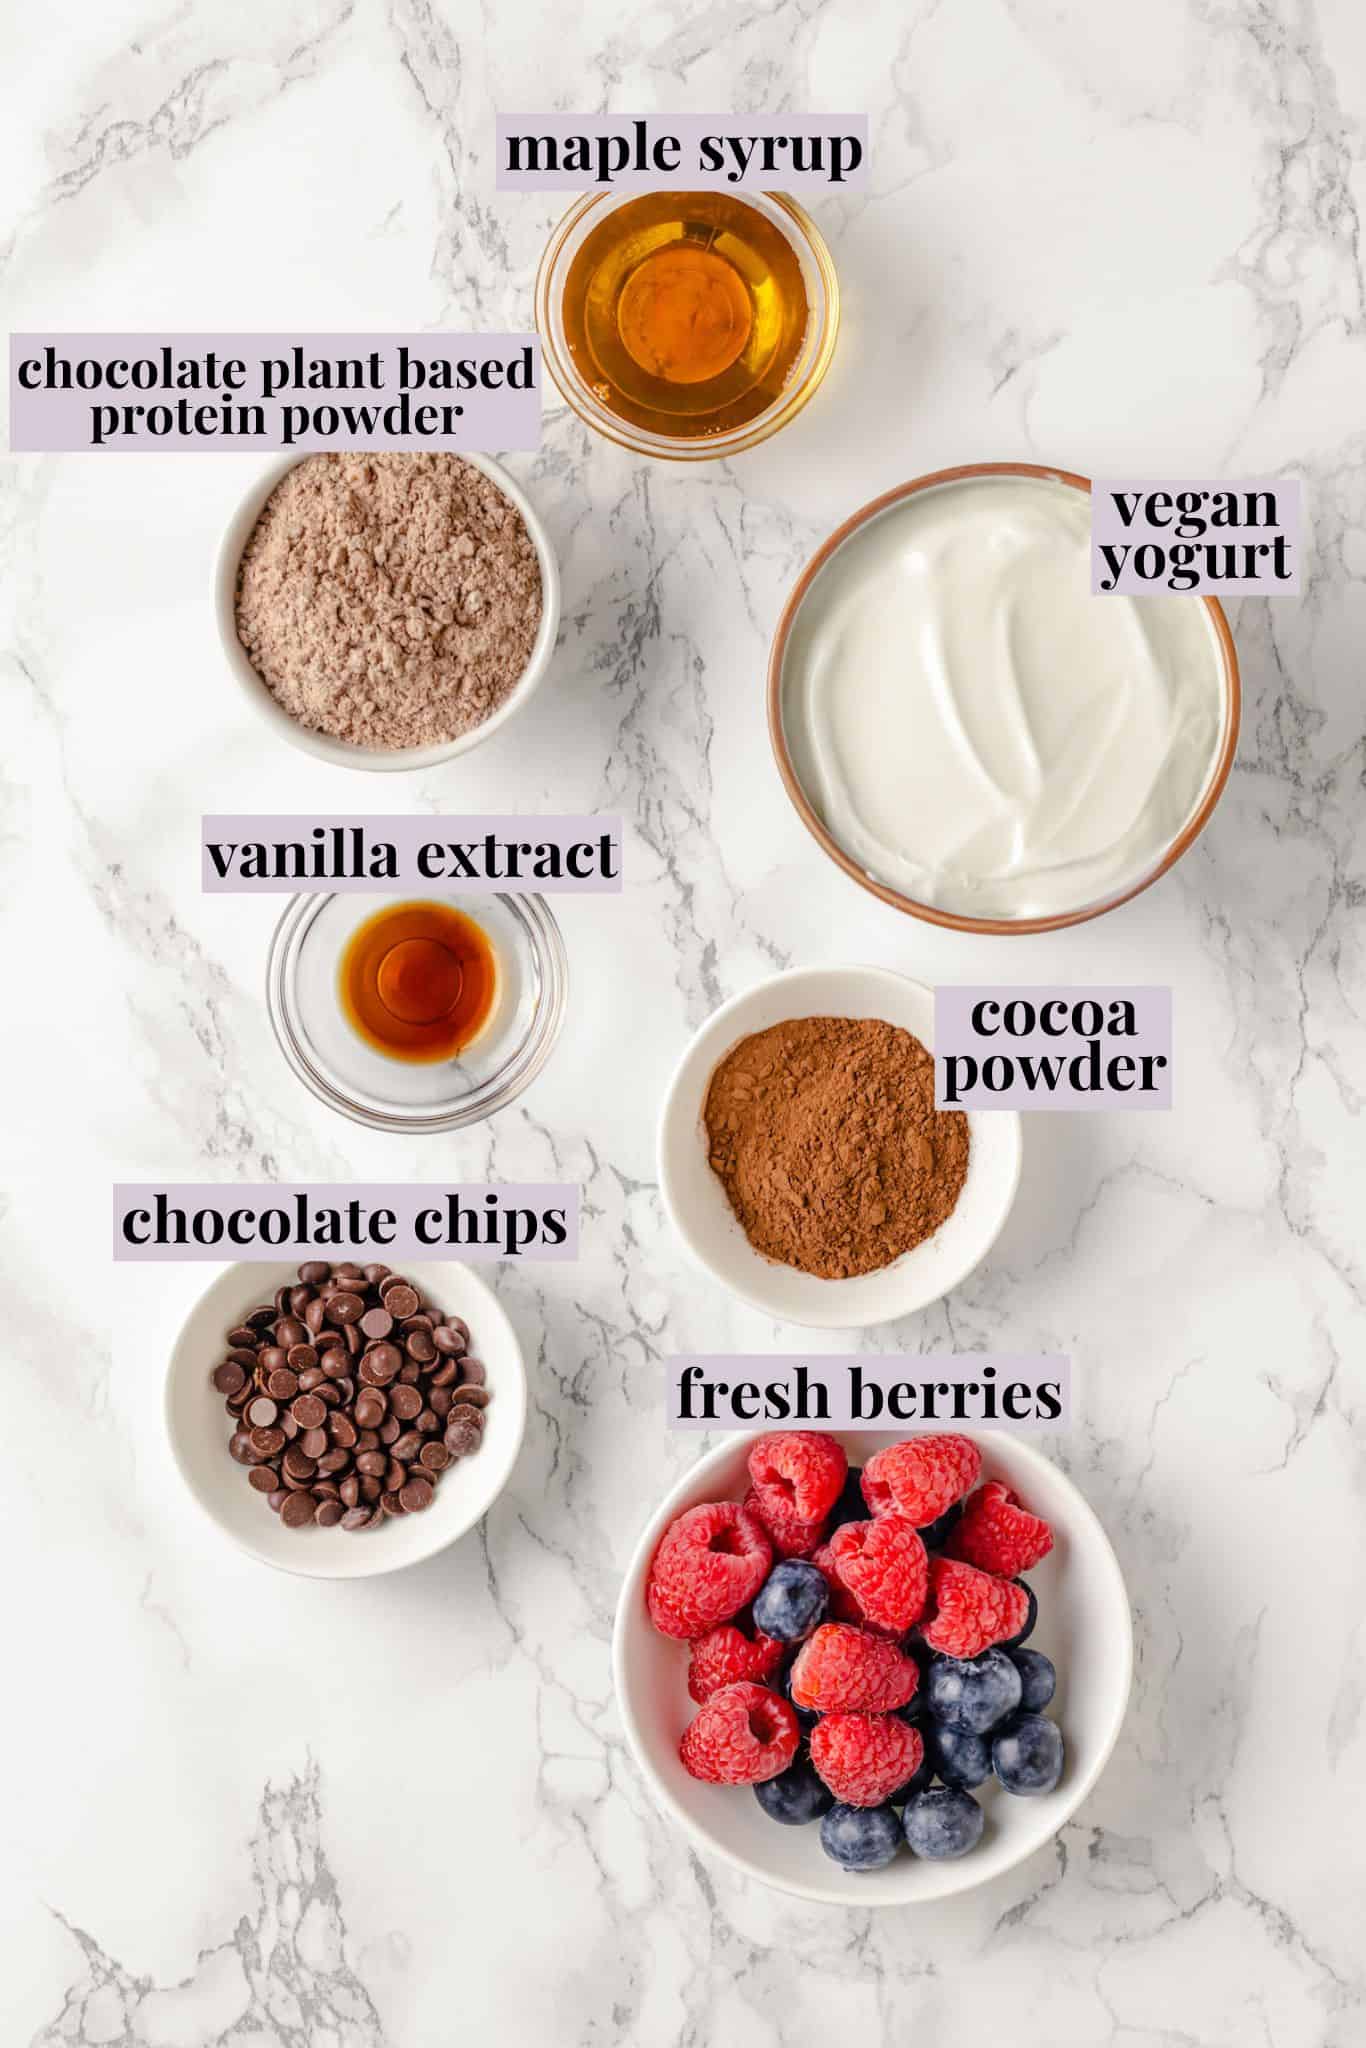 Overhead view of ingredients for protein pudding with labels